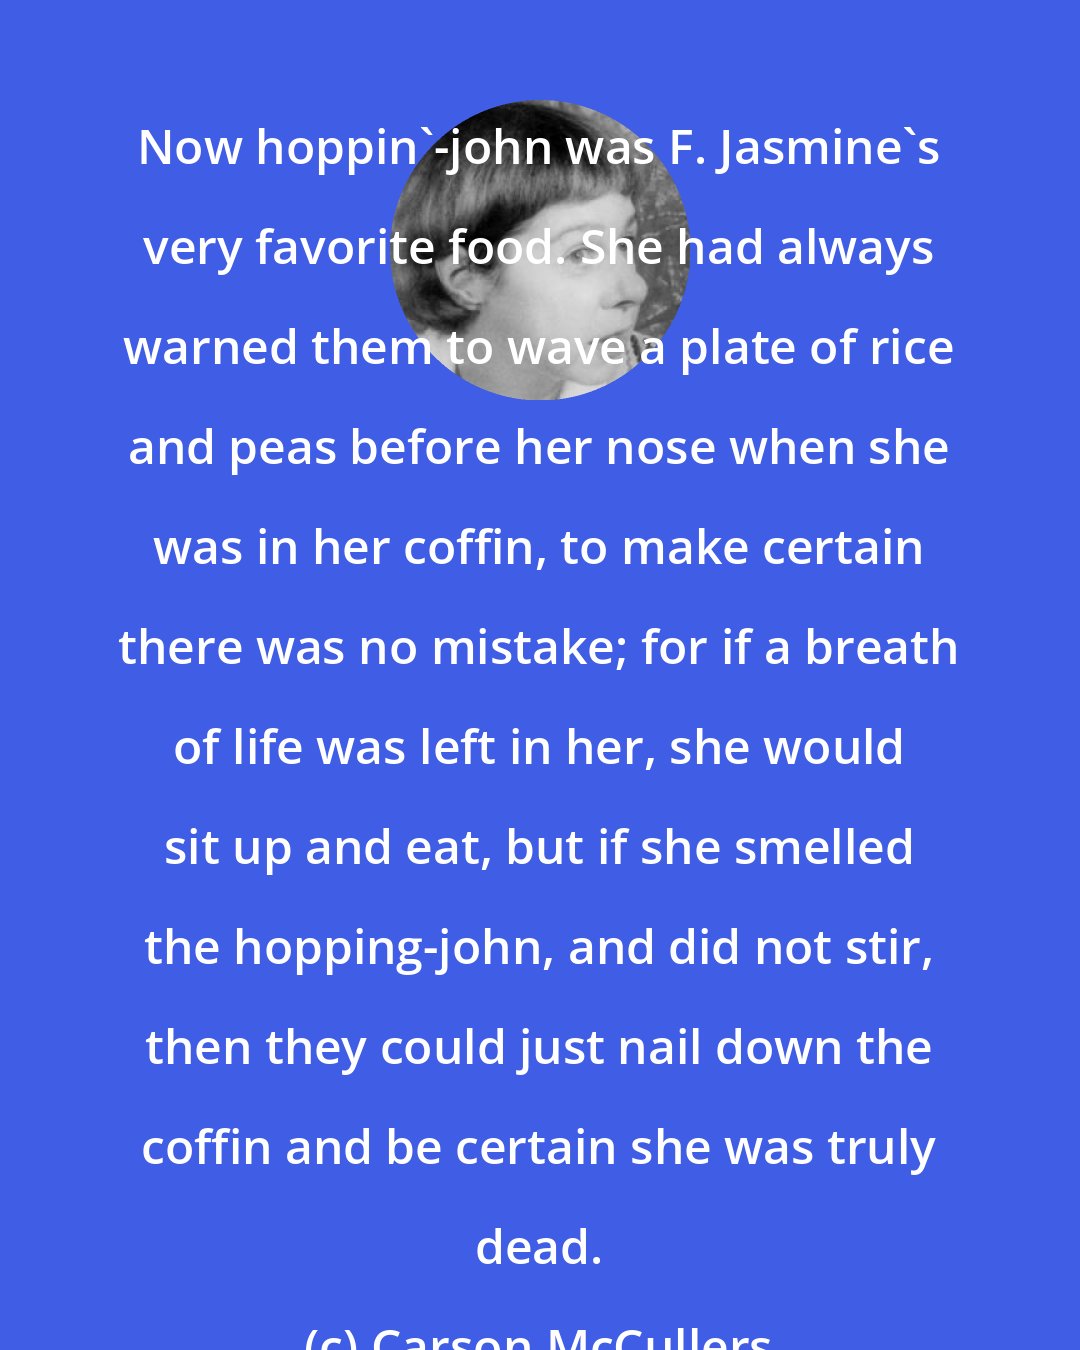 Carson McCullers: Now hoppin'-john was F. Jasmine's very favorite food. She had always warned them to wave a plate of rice and peas before her nose when she was in her coffin, to make certain there was no mistake; for if a breath of life was left in her, she would sit up and eat, but if she smelled the hopping-john, and did not stir, then they could just nail down the coffin and be certain she was truly dead.